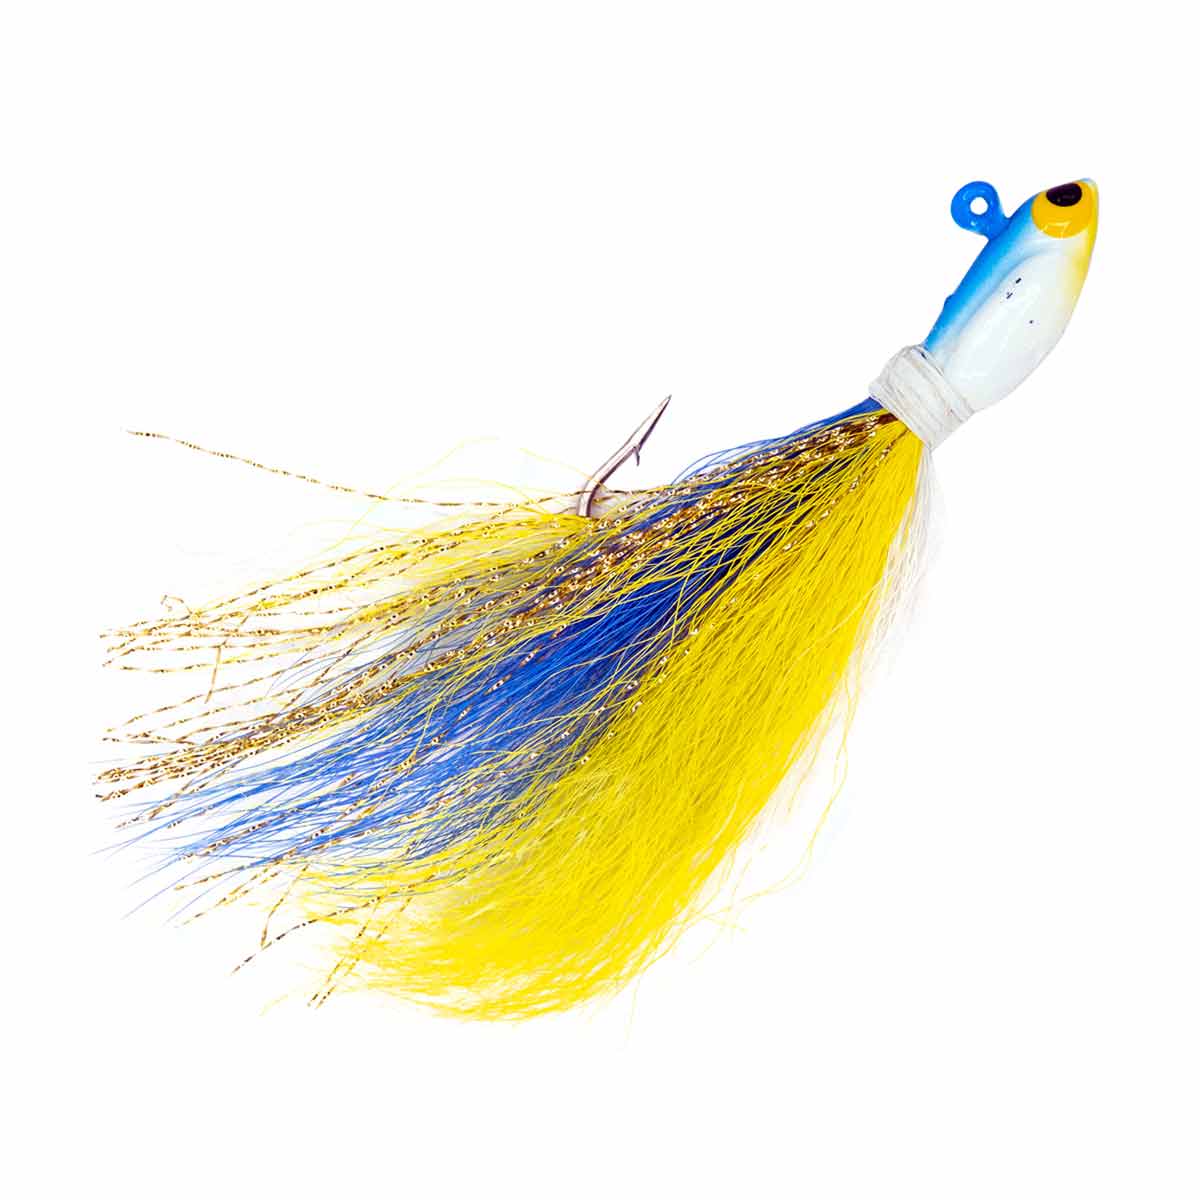 Charlie's 3/8 oz. Potbelly Bucktail Jig - Blue/White/Yellow